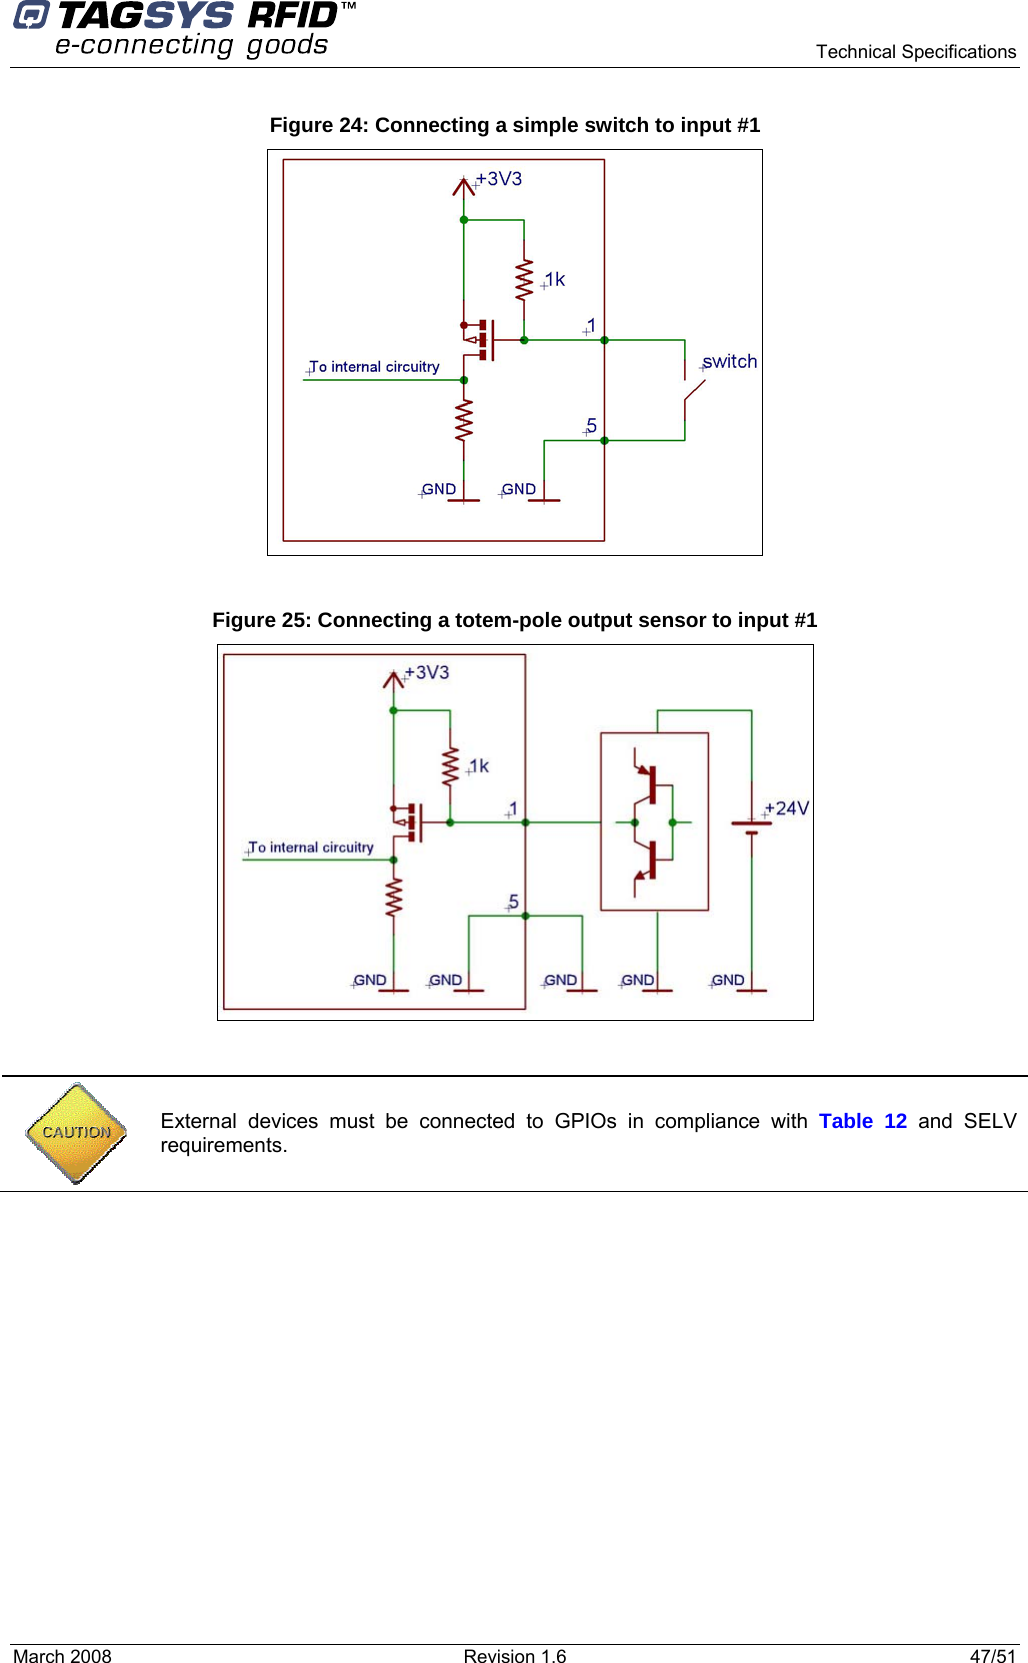      Technical Specifications March 2008  Revision 1.6  47/51  Figure 24: Connecting a simple switch to input #1   Figure 25: Connecting a totem-pole output sensor to input #1    External devices must be connected to GPIOs in compliance with Table 12 and SELV requirements. 